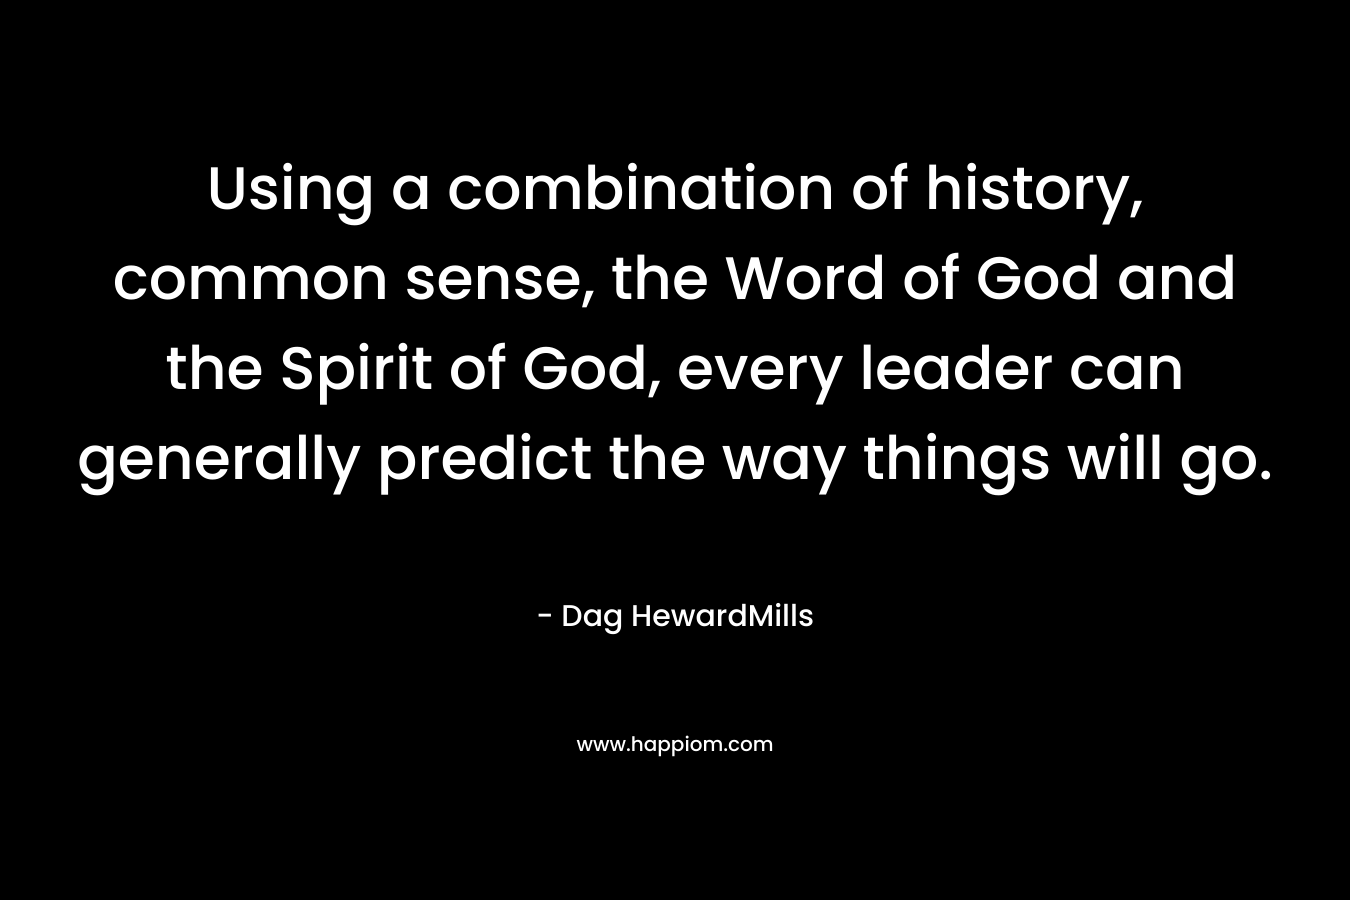 Using a combination of history, common sense, the Word of God and the Spirit of God, every leader can generally predict the way things will go.